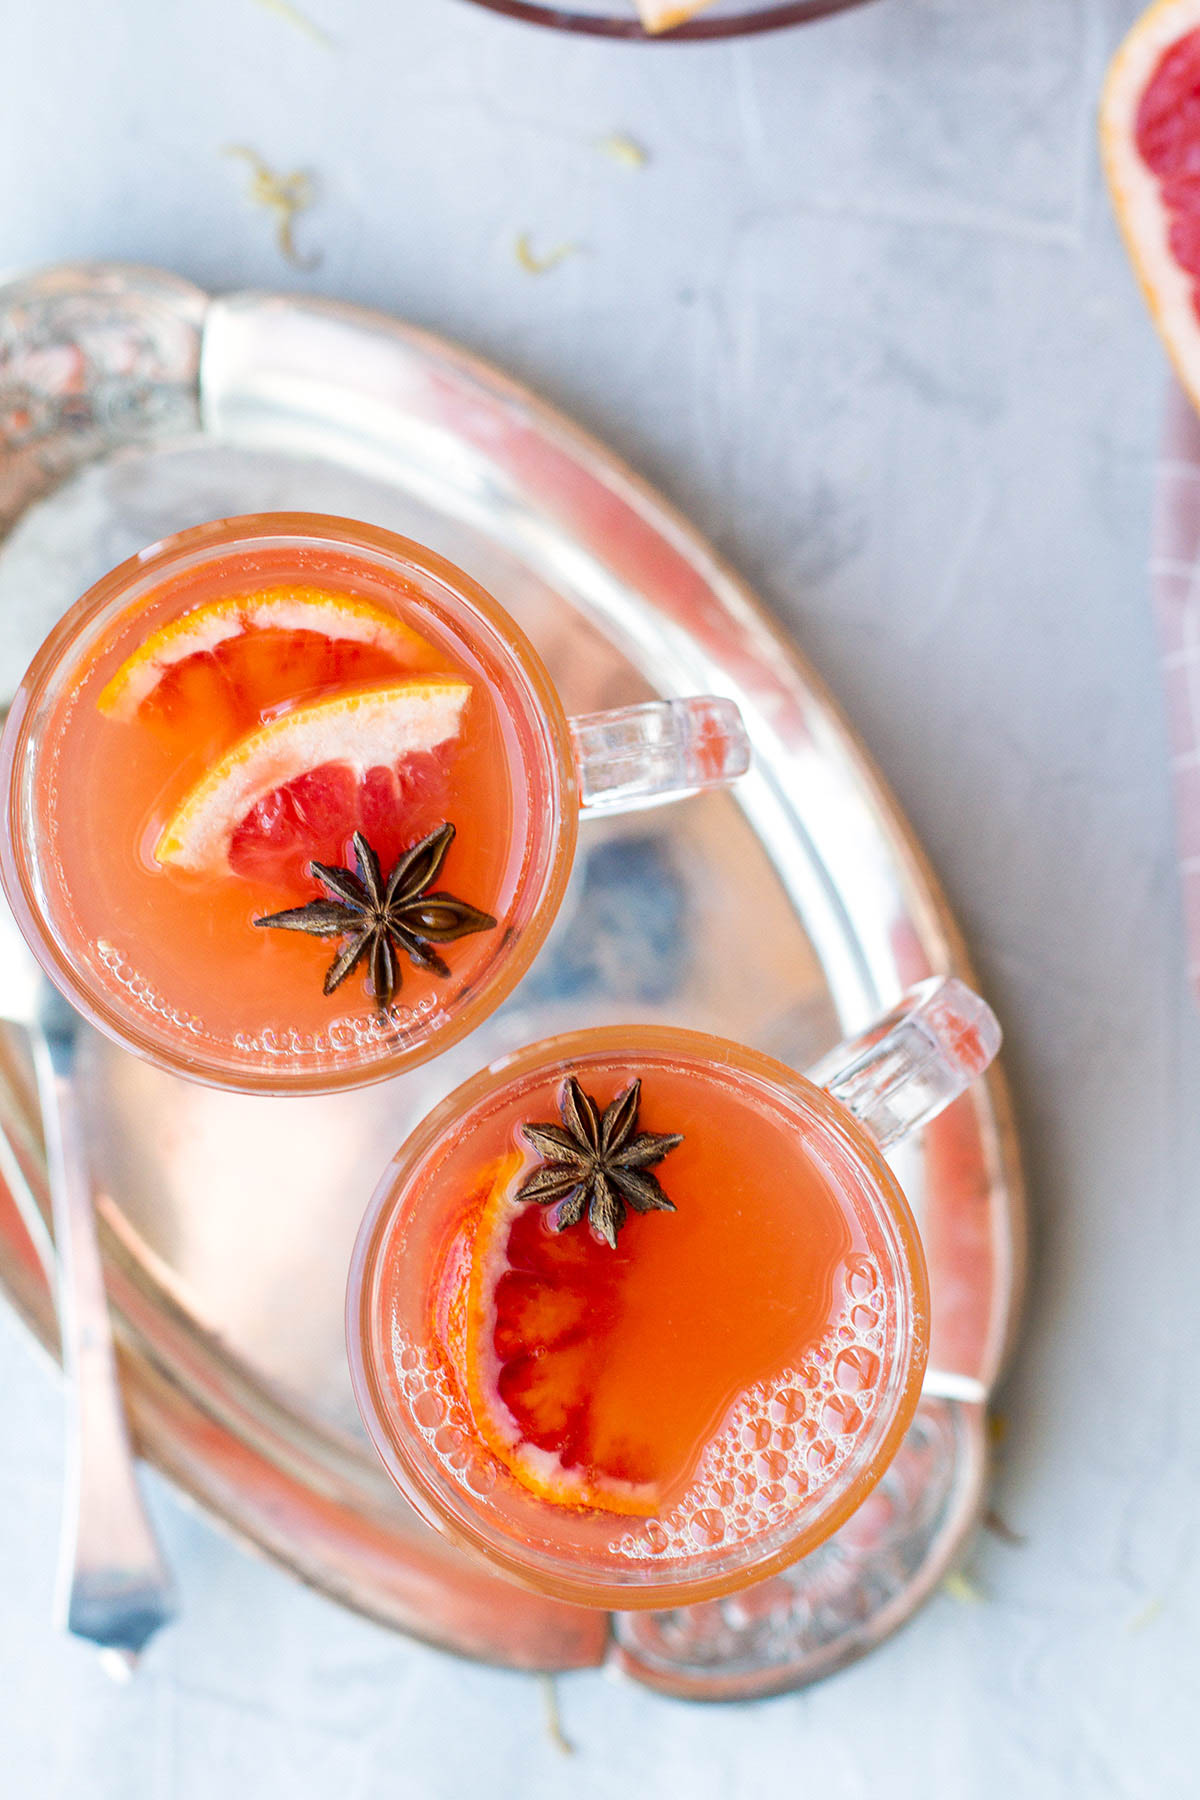 Two glasses with orange cider, garnished with grapefruit wedges and star anise. Seen from above.